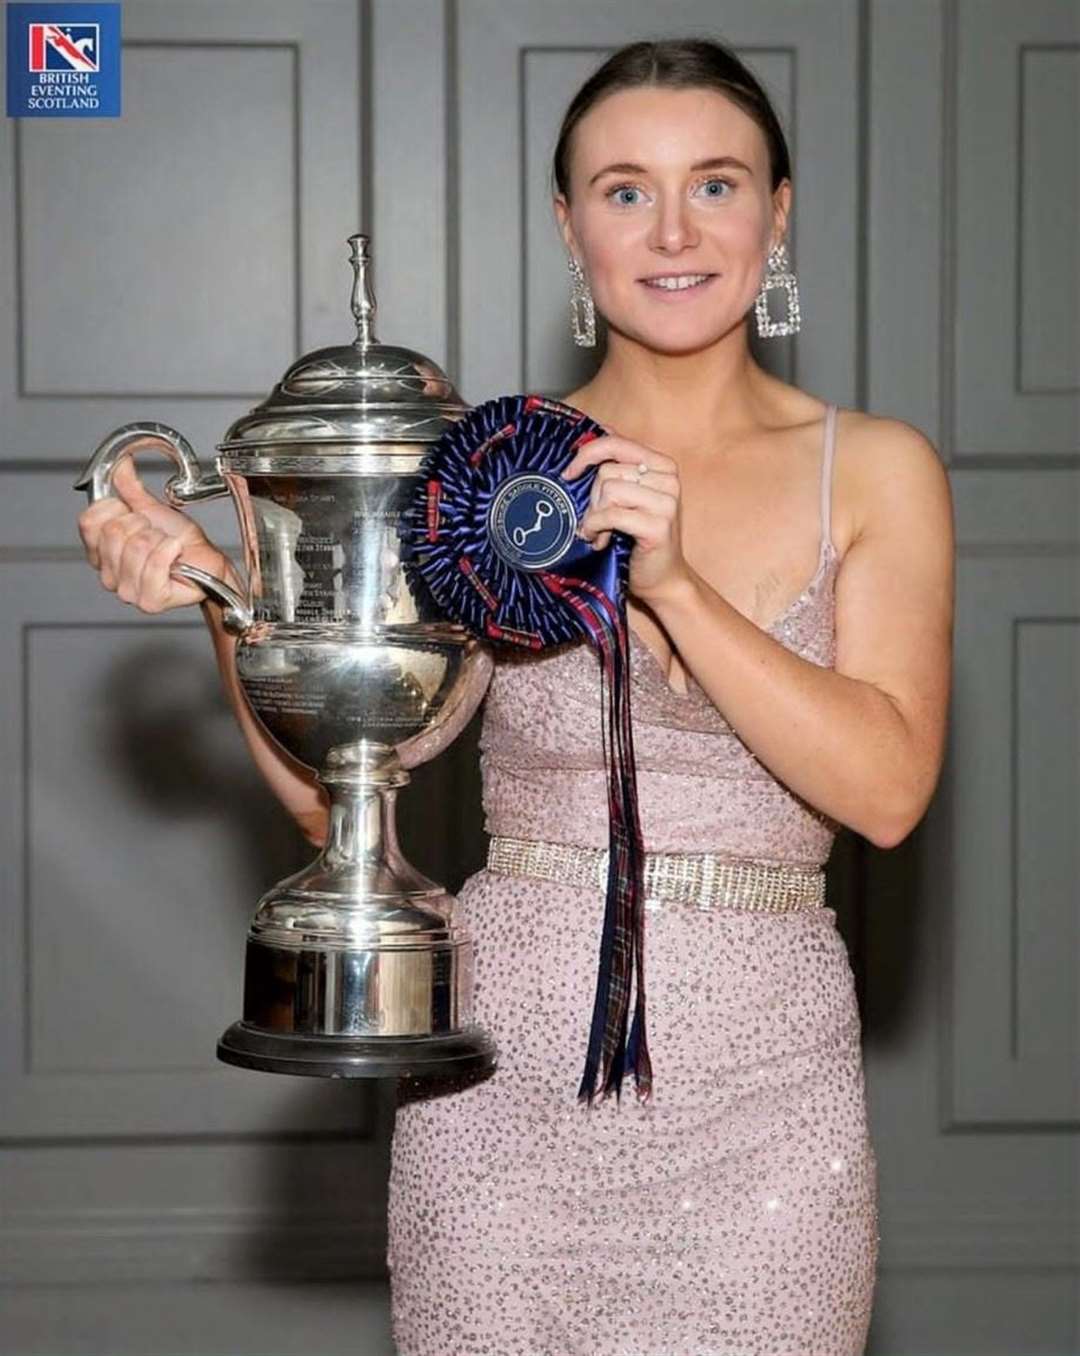 Emma Coghill won the Stirlingshire Saddle Fitters championship trophy for the horse winning the most points over the Scottish circuit. Picture: Jim Crichton Media